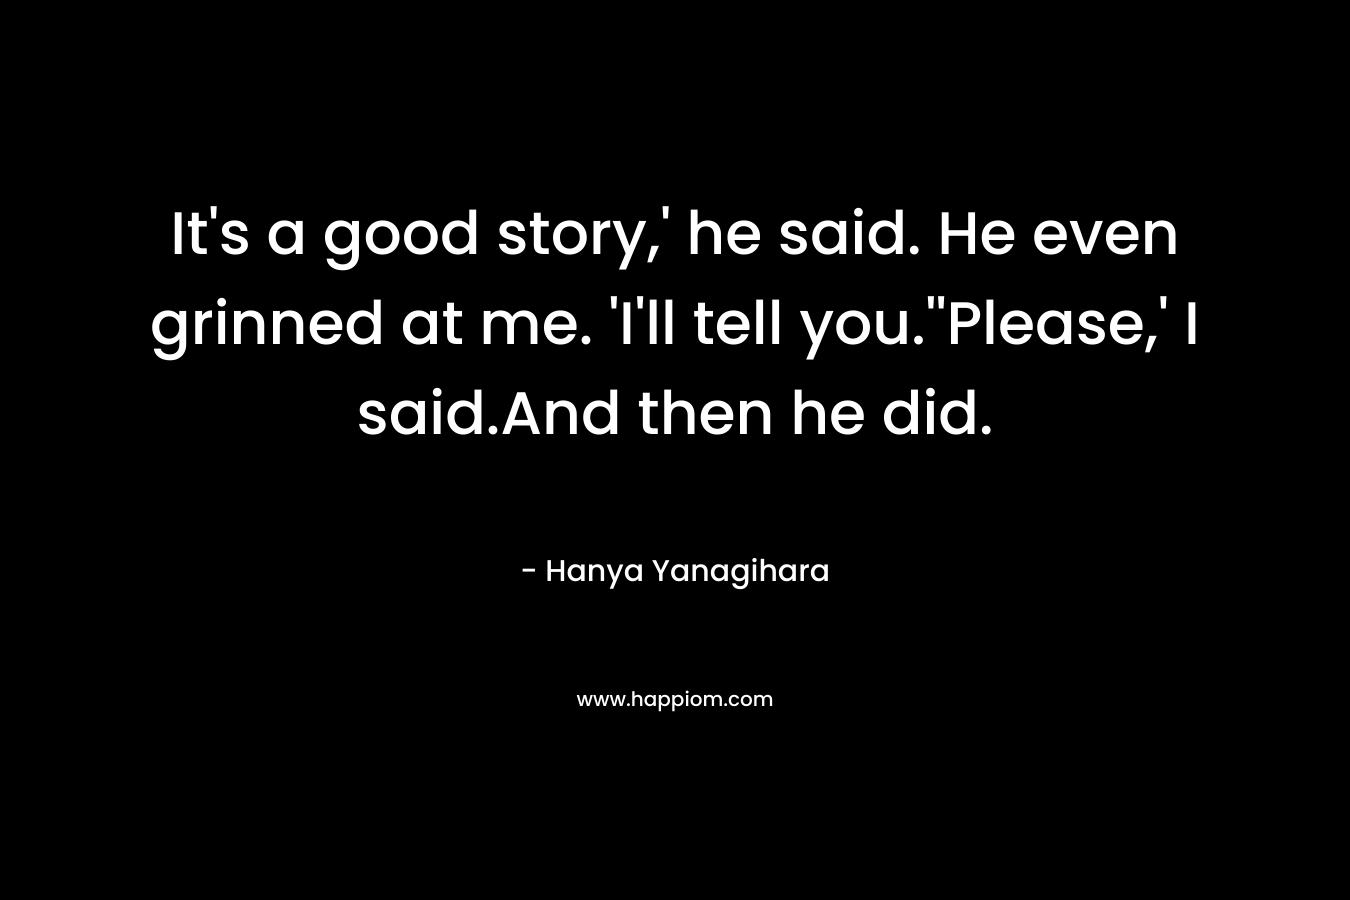 It’s a good story,’ he said. He even grinned at me. ‘I’ll tell you.”Please,’ I said.And then he did. – Hanya Yanagihara